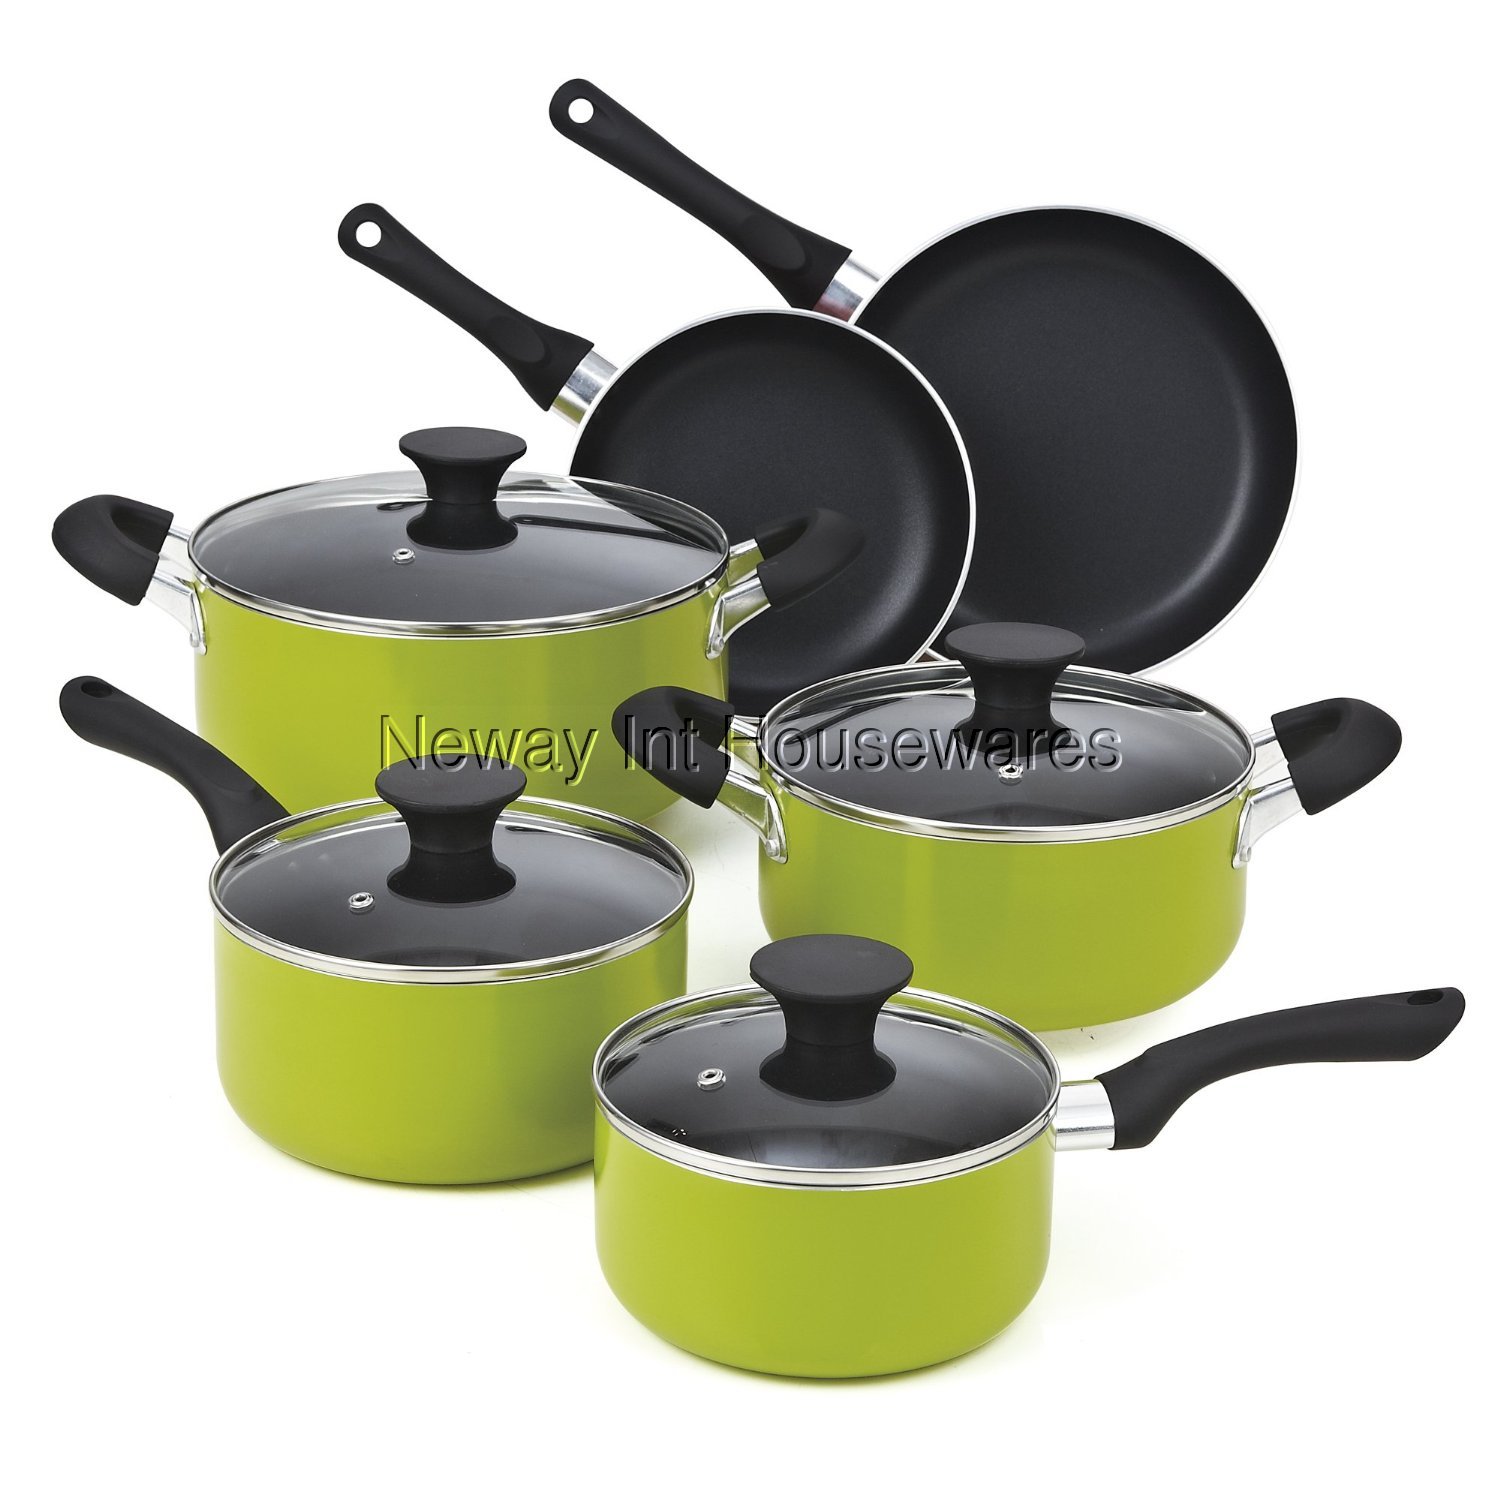  Cook N Home Pots and Pans Set Nonstick, 10 Piece Ceramic  Kitchen Cookware Sets, Nonstick Cooking Set with Saucepans, Frying Pans,  Dutch Oven Pot with Lids, Green: Home & Kitchen